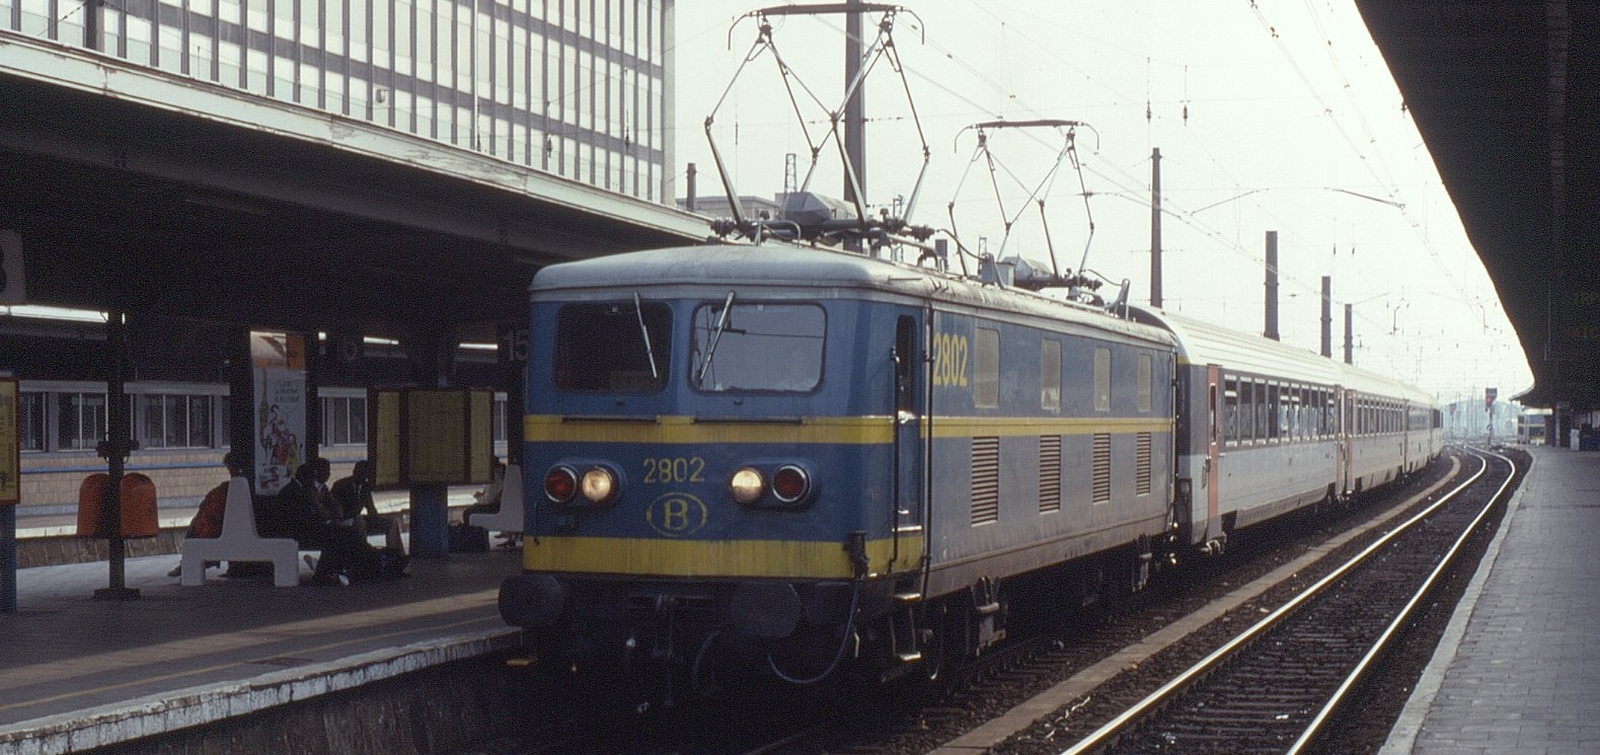 2802 in October 1991 shunting an international passenger train in Brussels